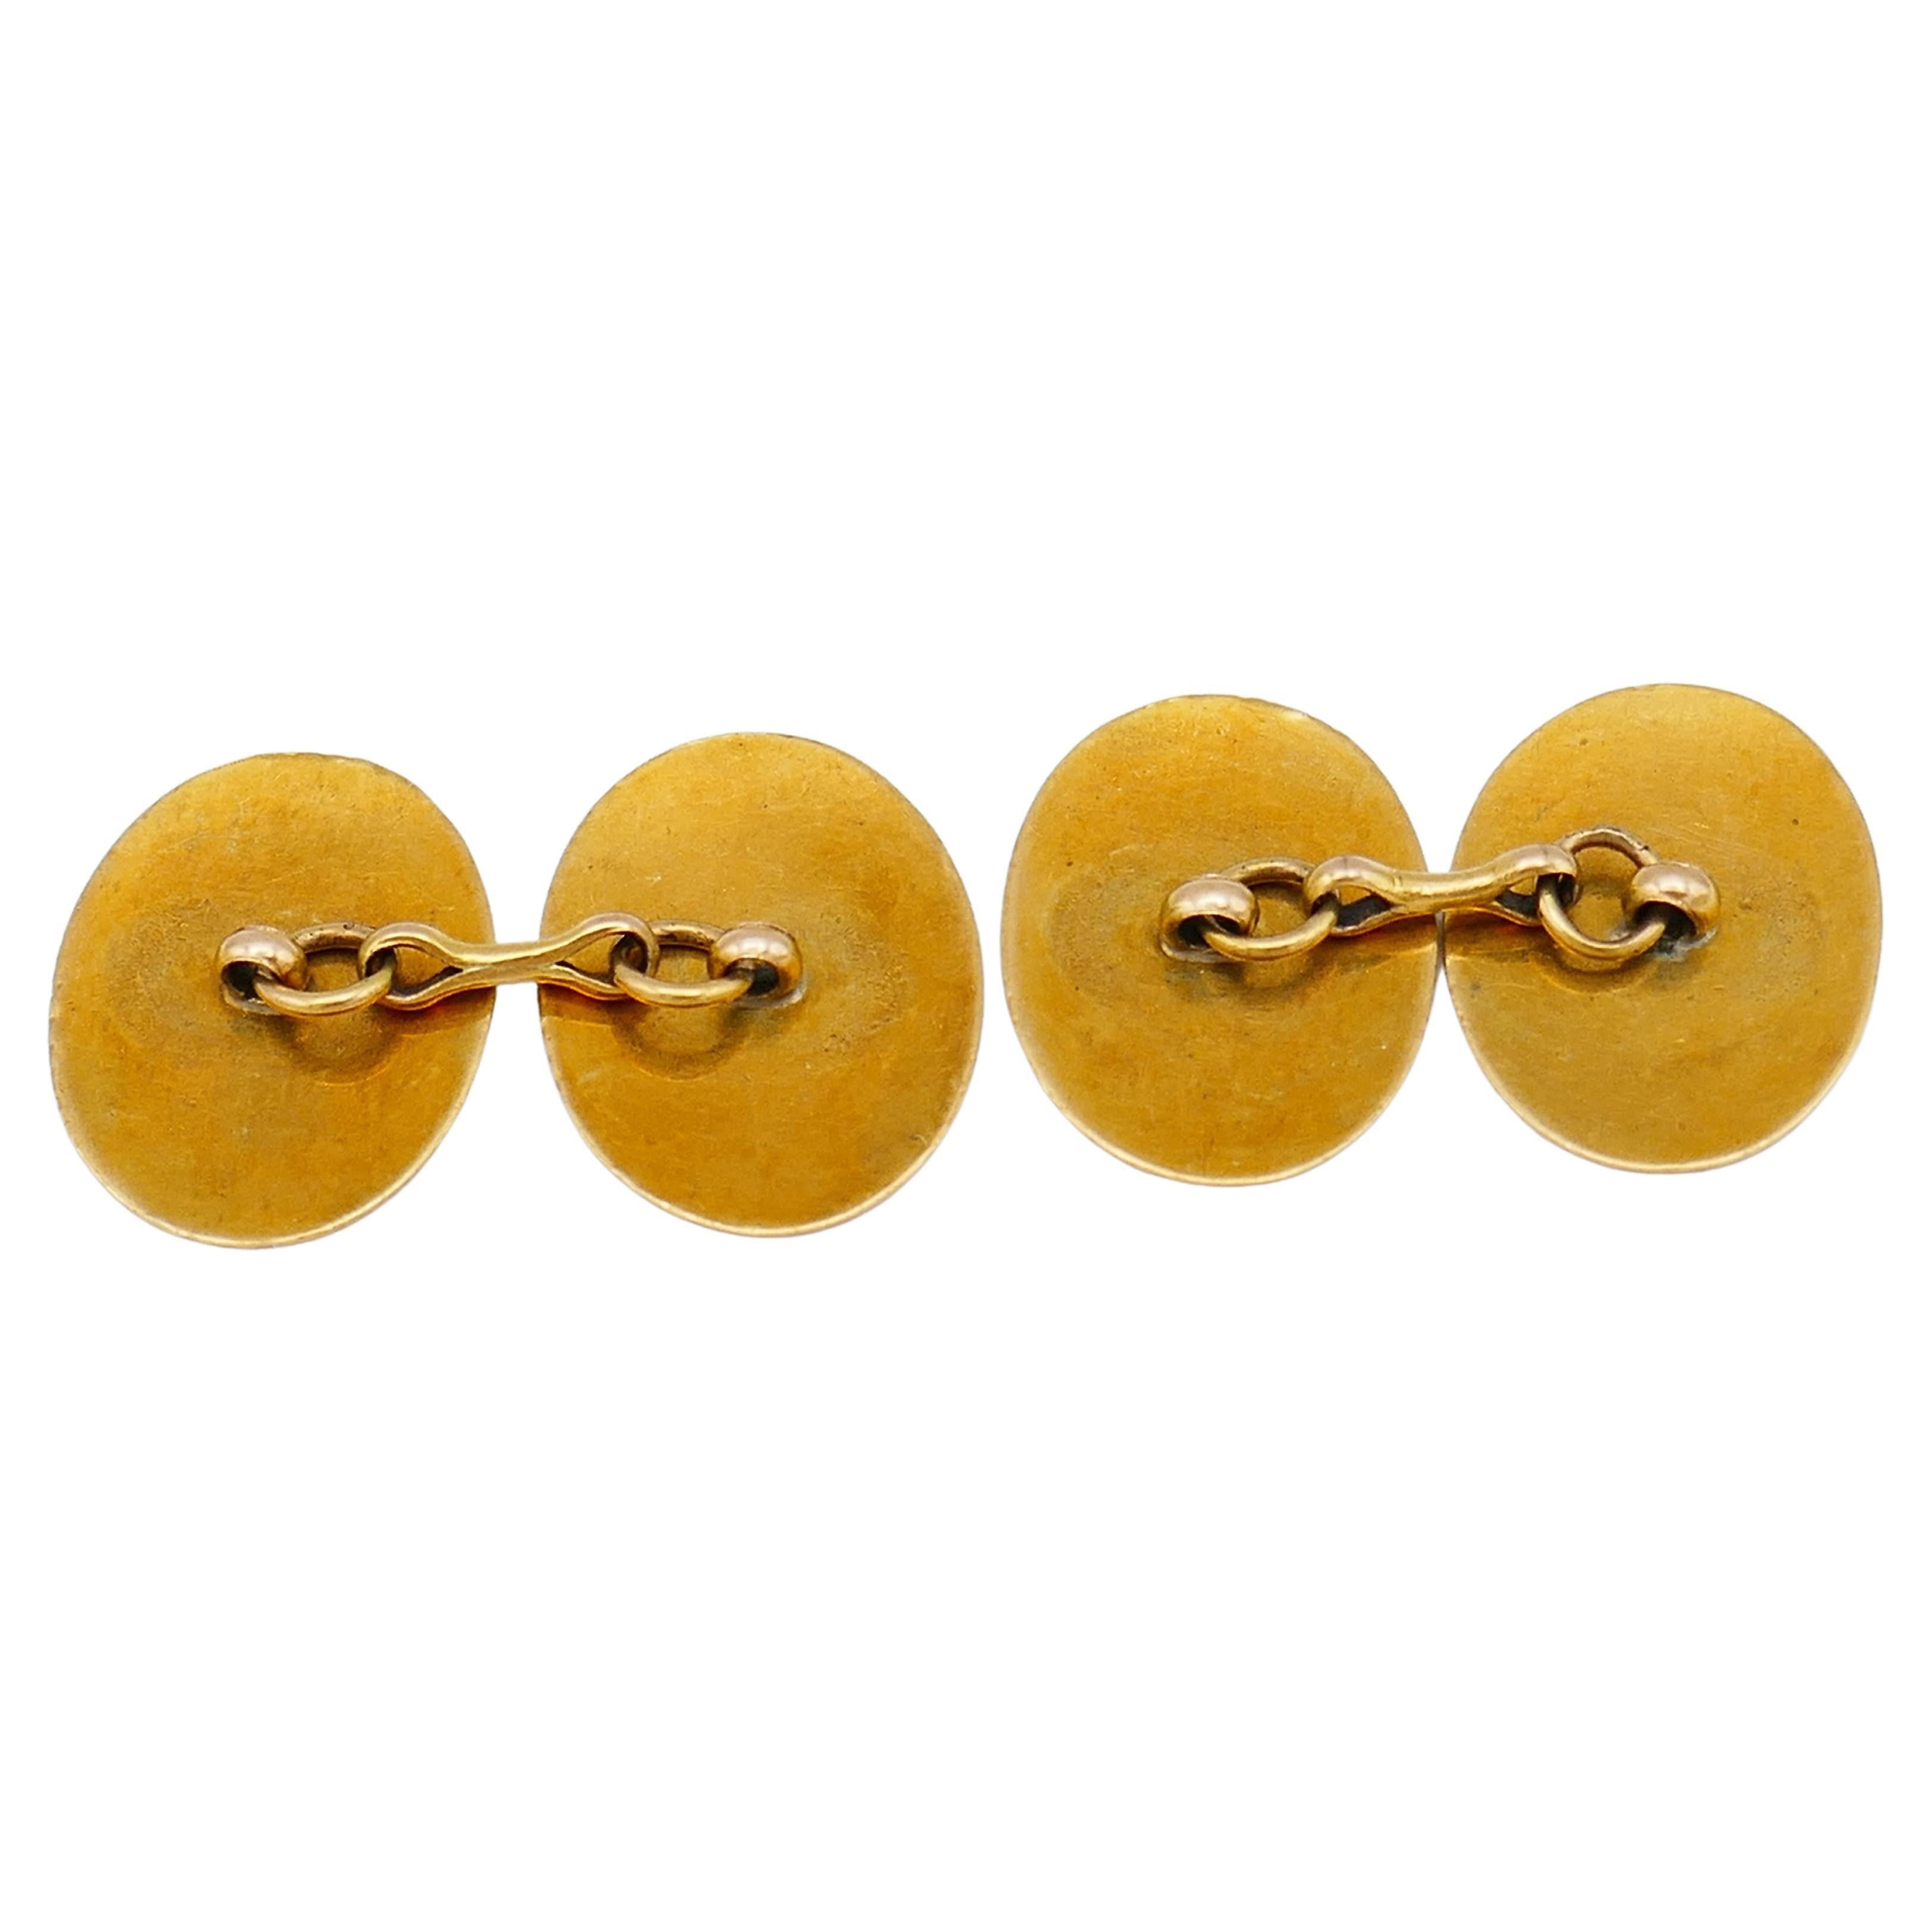 A pair of beautiful antique 18k gold and enamel cufflinks. 
The cufflinks are oval shape, with floral engraving on the edges. One of the cufflinks has an enamel family crest that looks like a stylized fleur-di-lis symbol. Another one has a symbol of